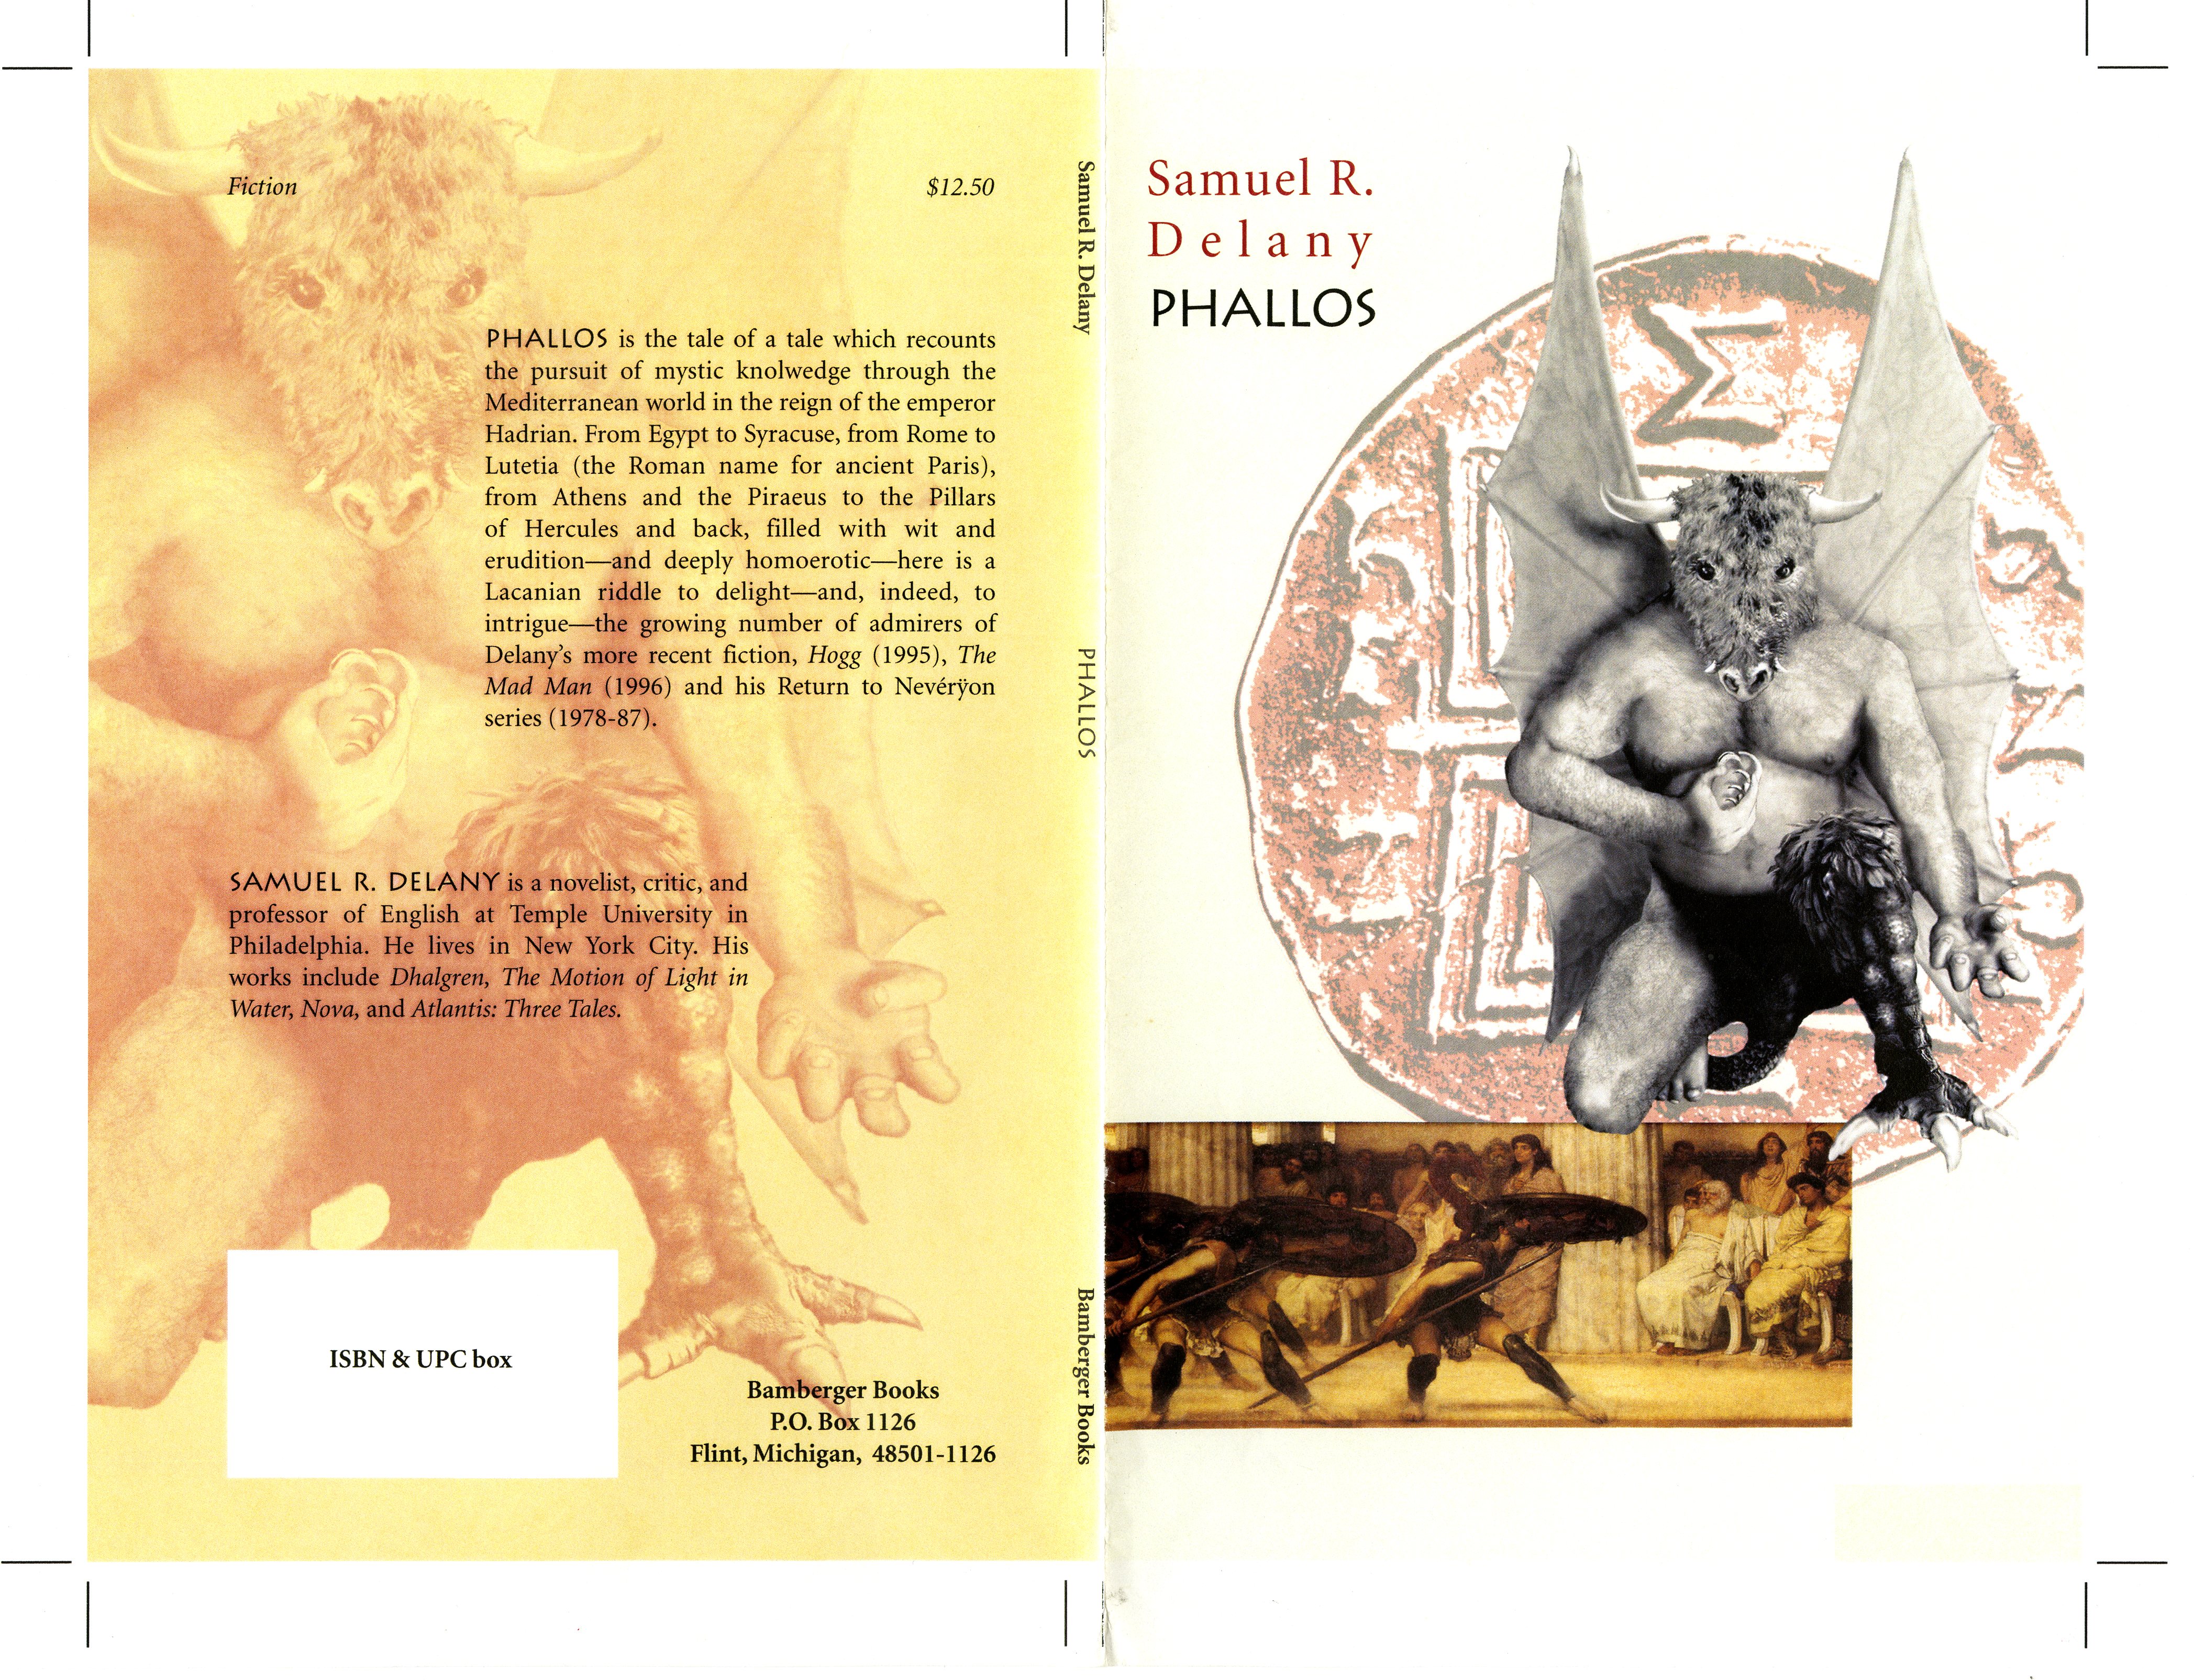 Delany, Samuel R. Phallos (Bamberger Books, 2004), color proof of the cover, from the Samuel Delany papers